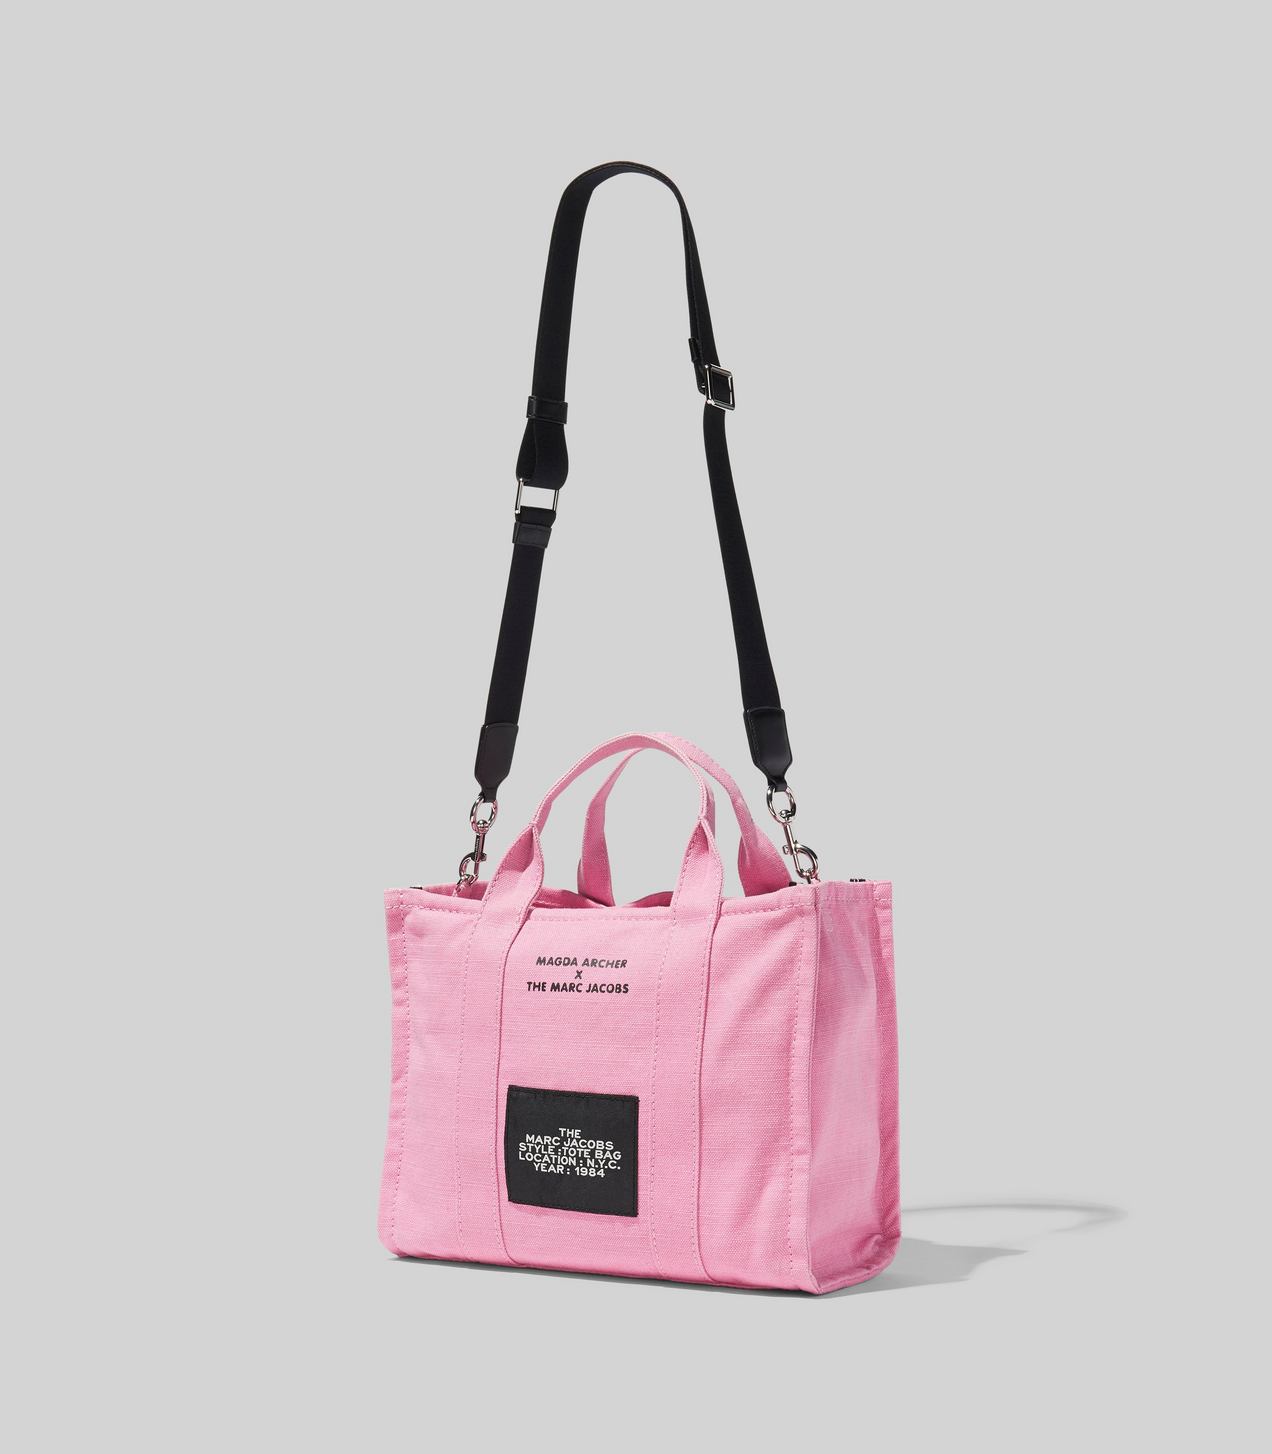 Magda Archer x The Small Traveler Tote Marc Jacobs